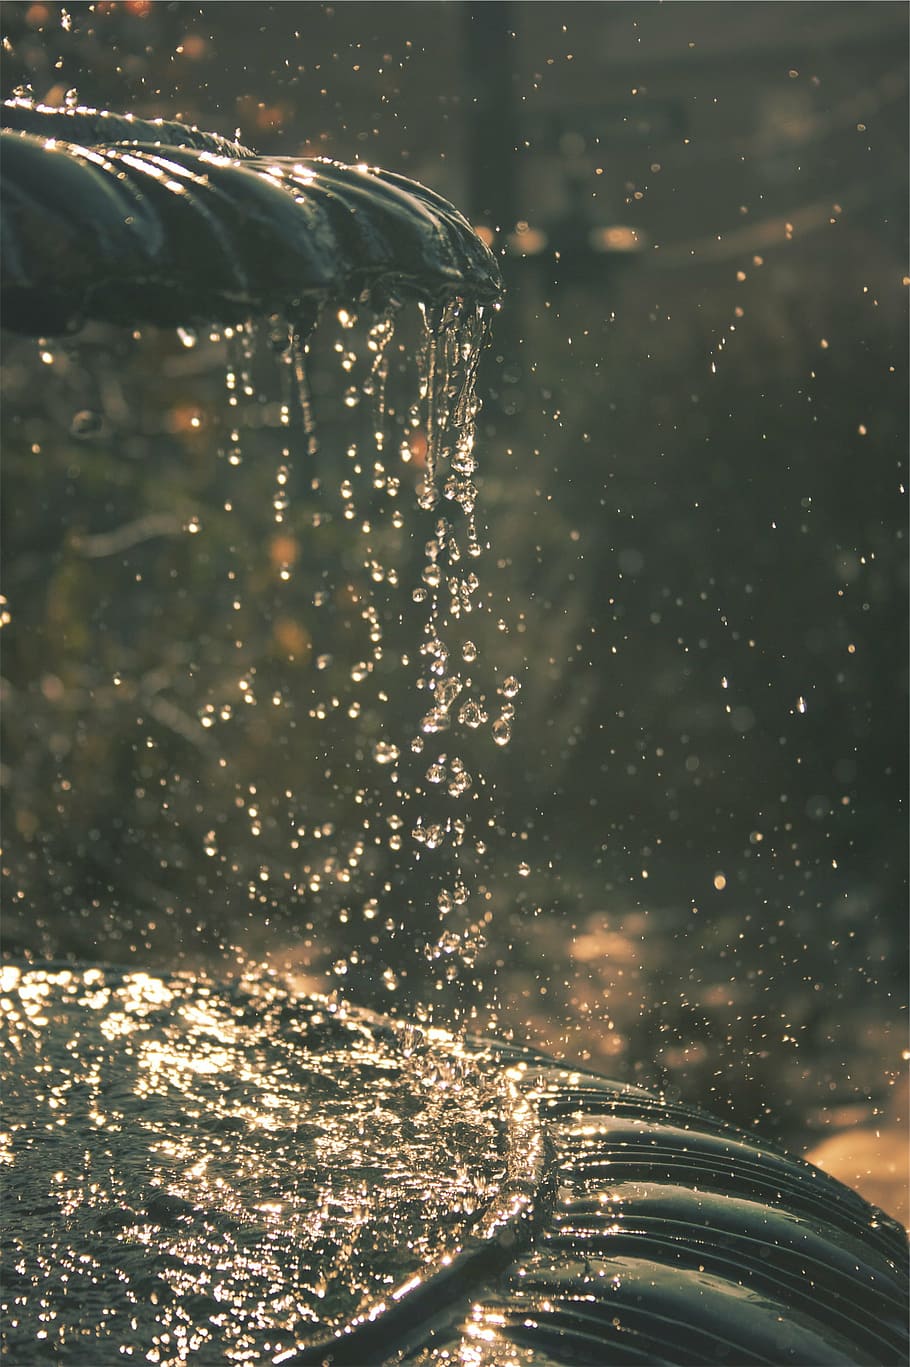 close-up photo, water dew, fountain, time, lapse, photography, outdoor, water, drops, winter